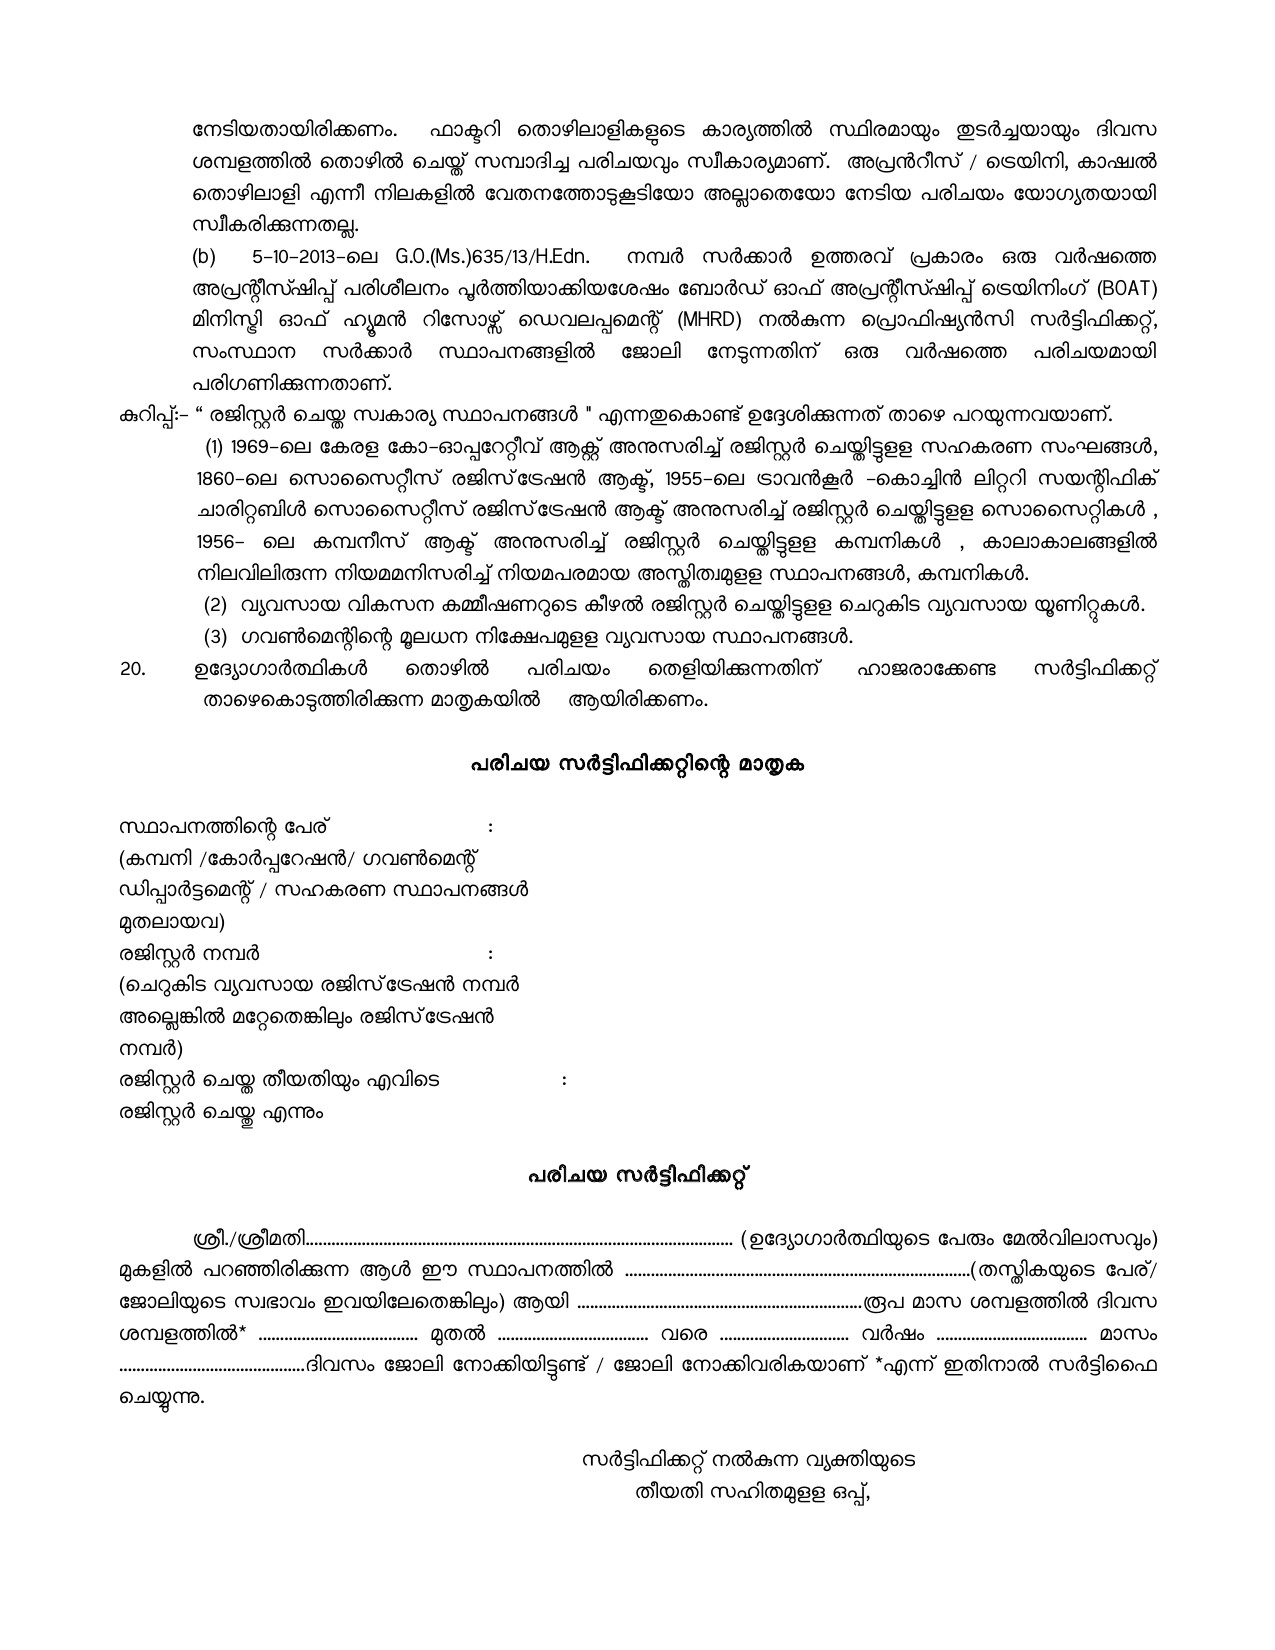 General Conditions and Certificate Formats in Malayalam - Notification Image 22